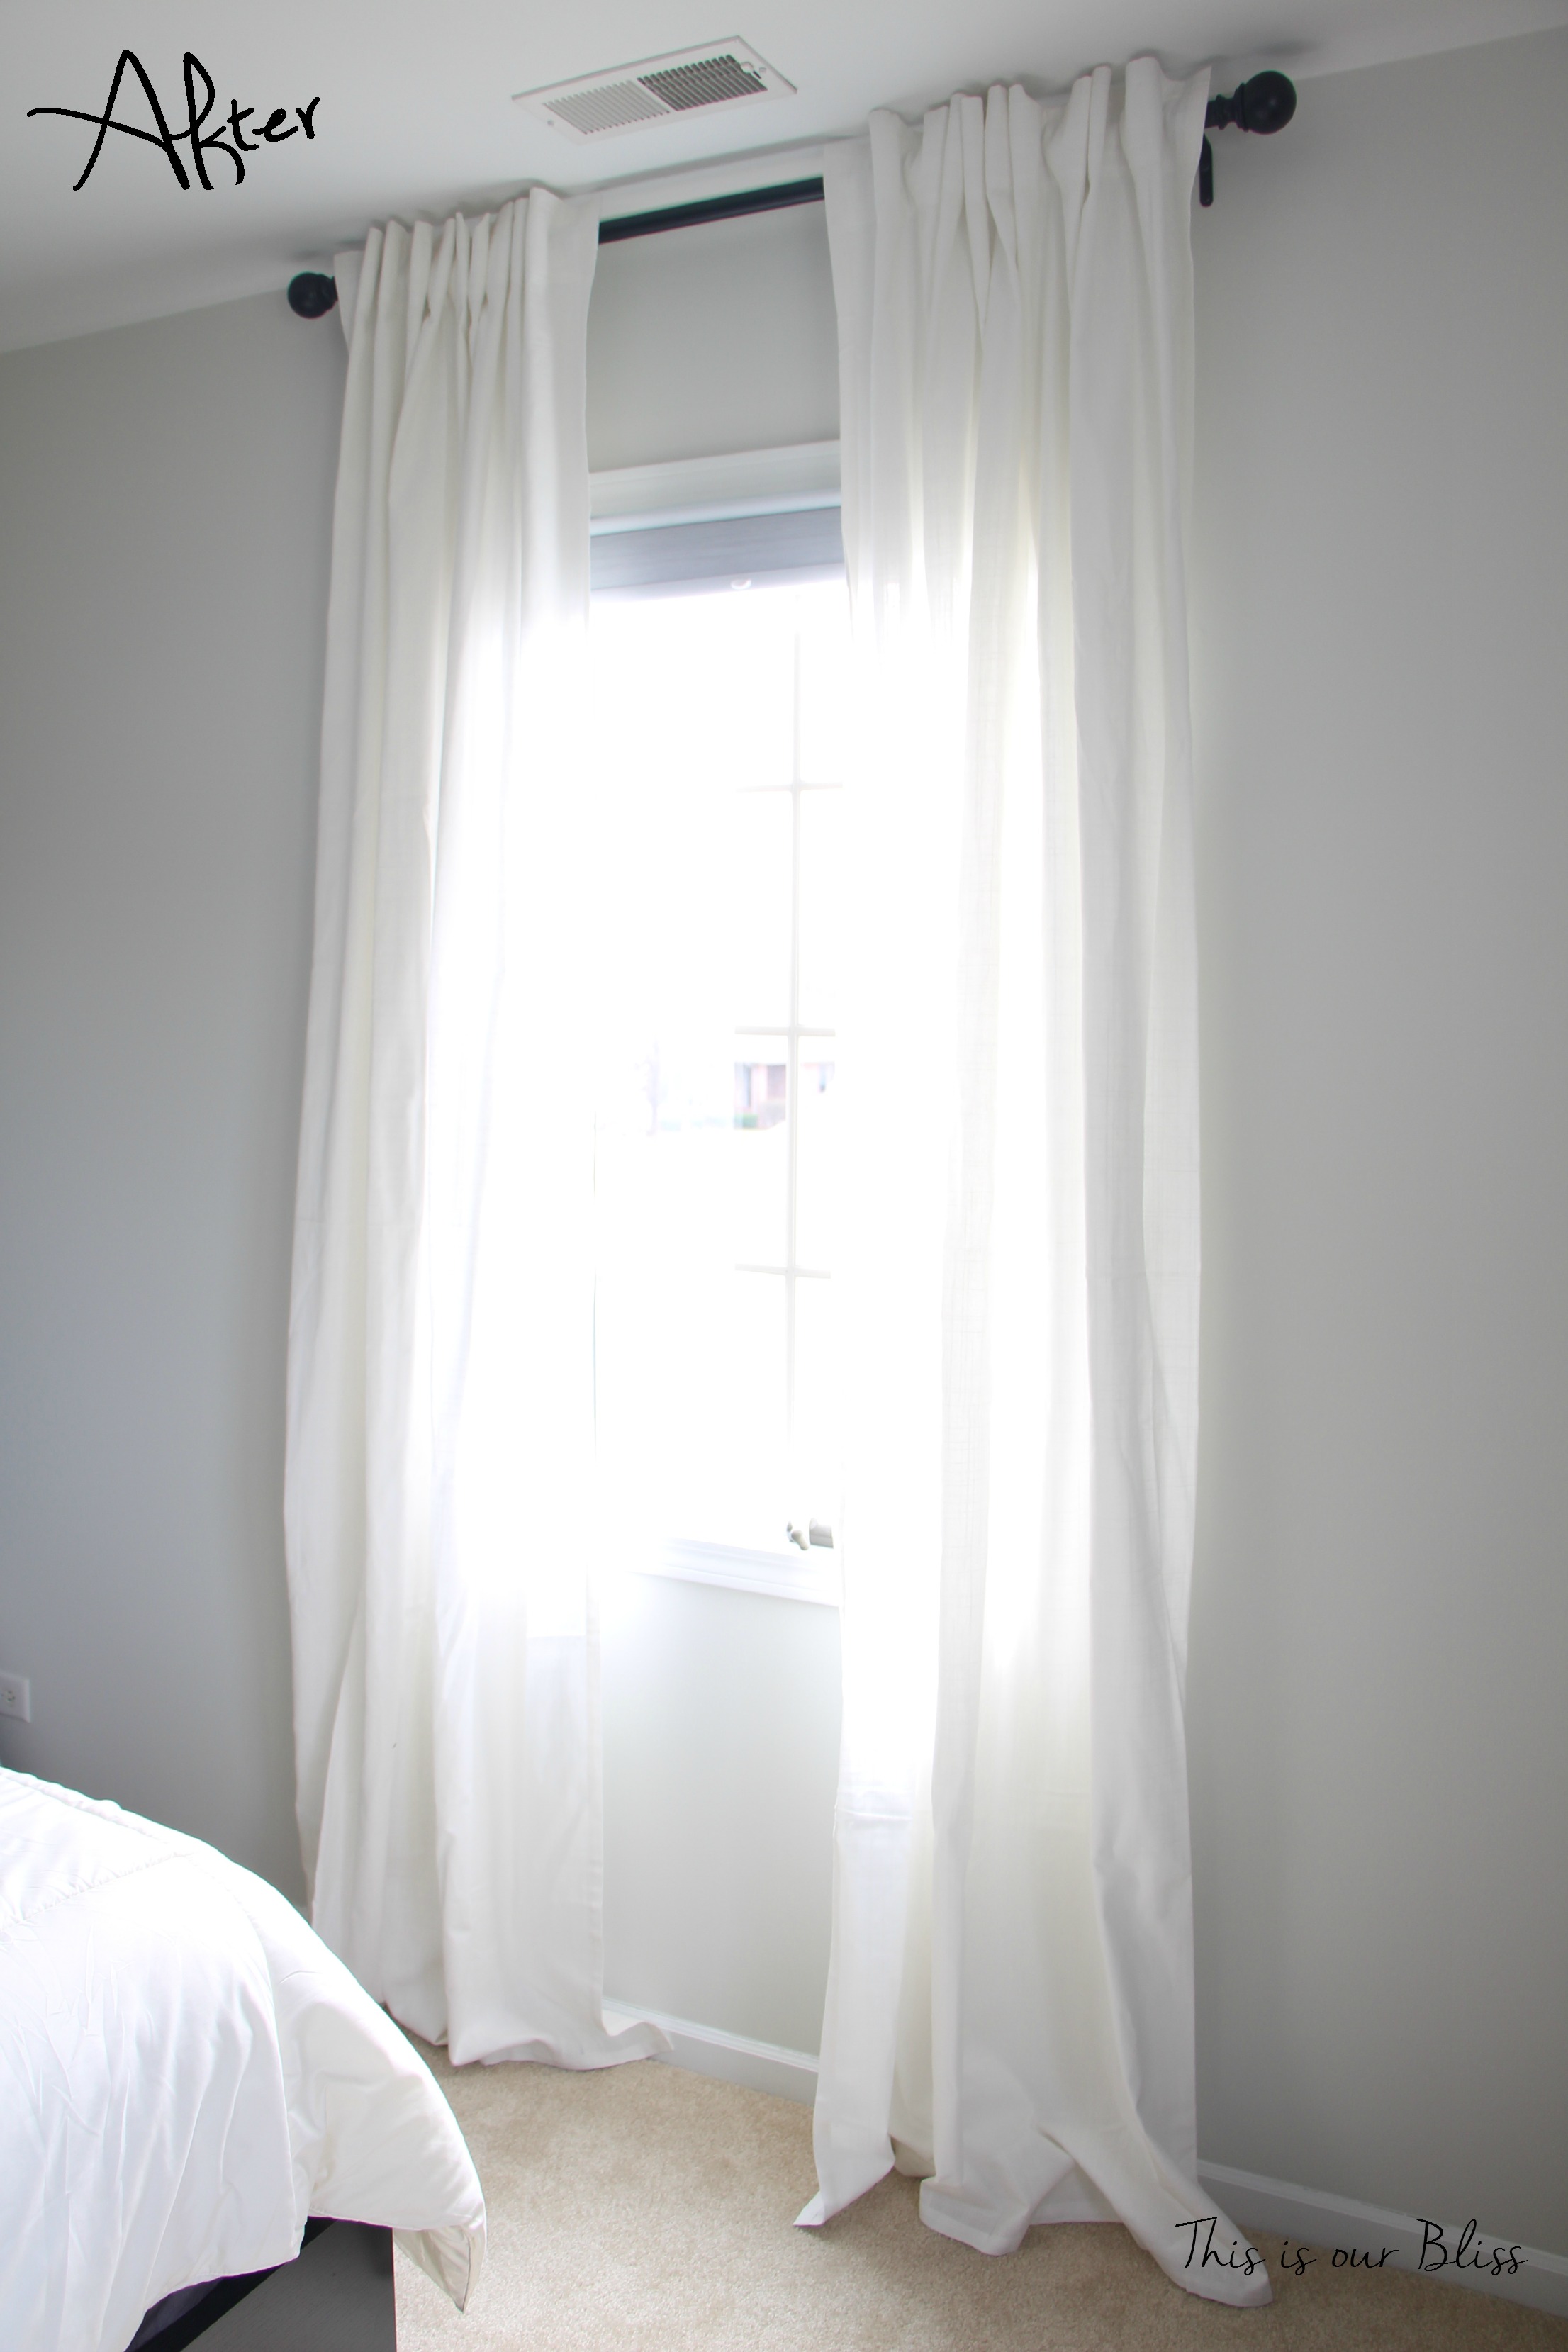 Curtain & curtain rods after - One Room Challenge - Guestroom Revamp - This is our Bliss